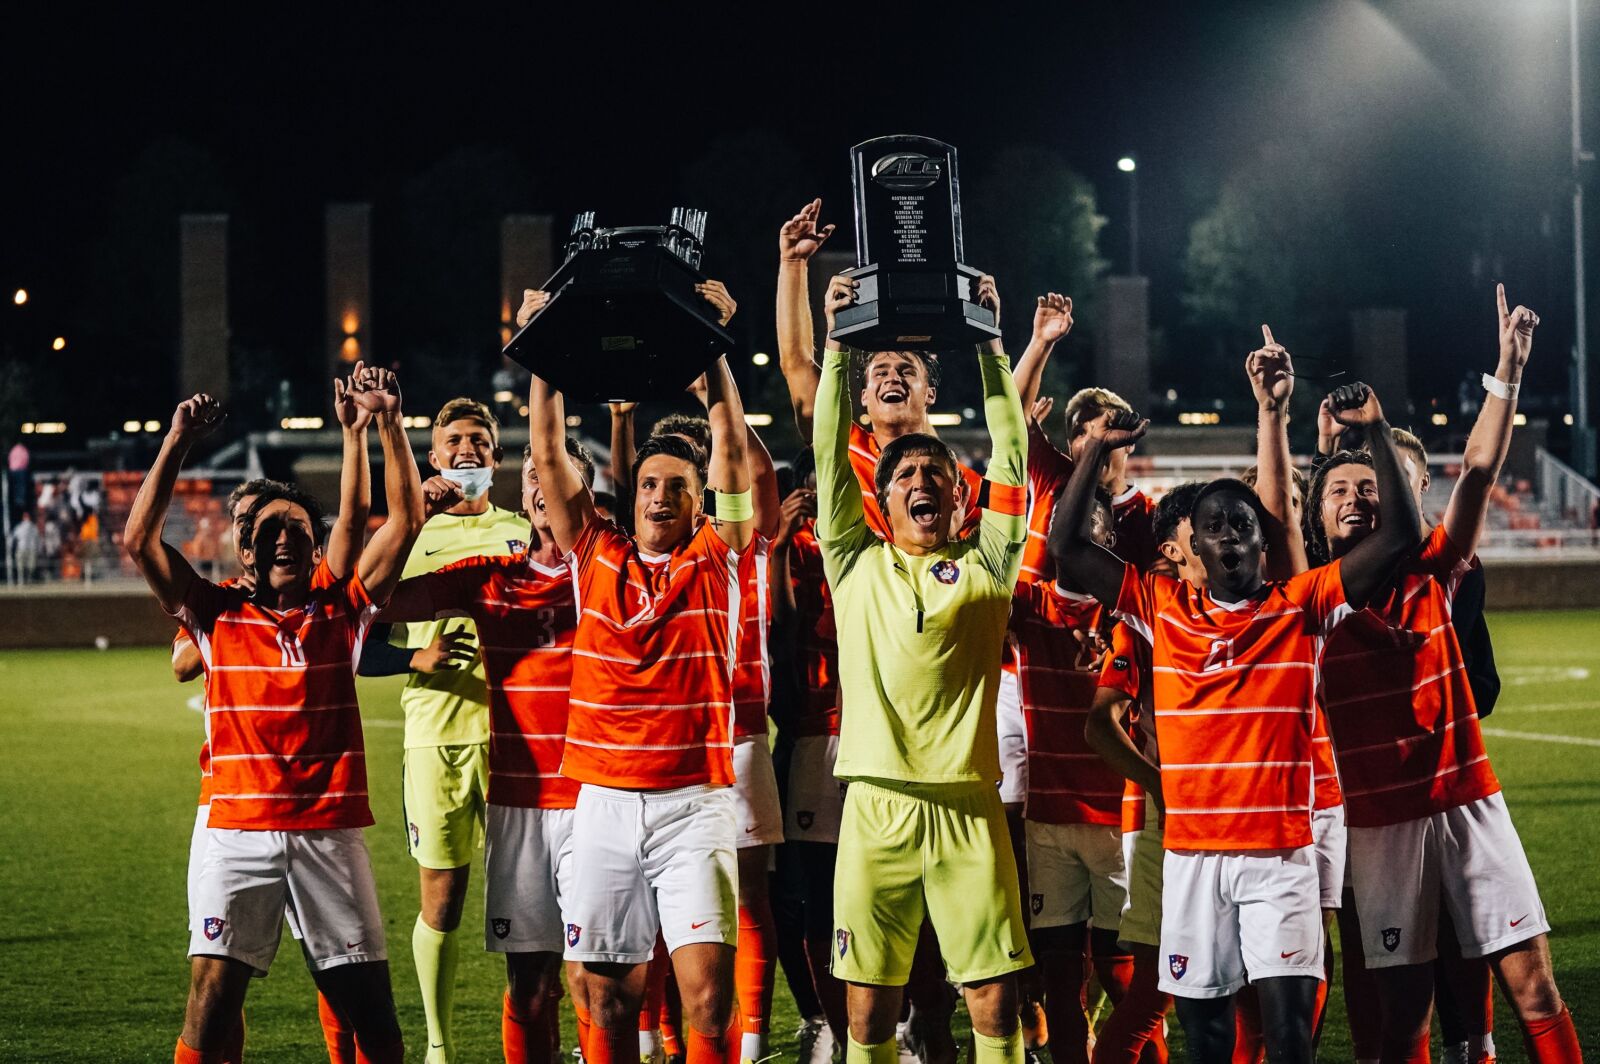 Men’s Soccer Earns No. 1 Seed in 2020 NCAA Tournament Clemson Sports News